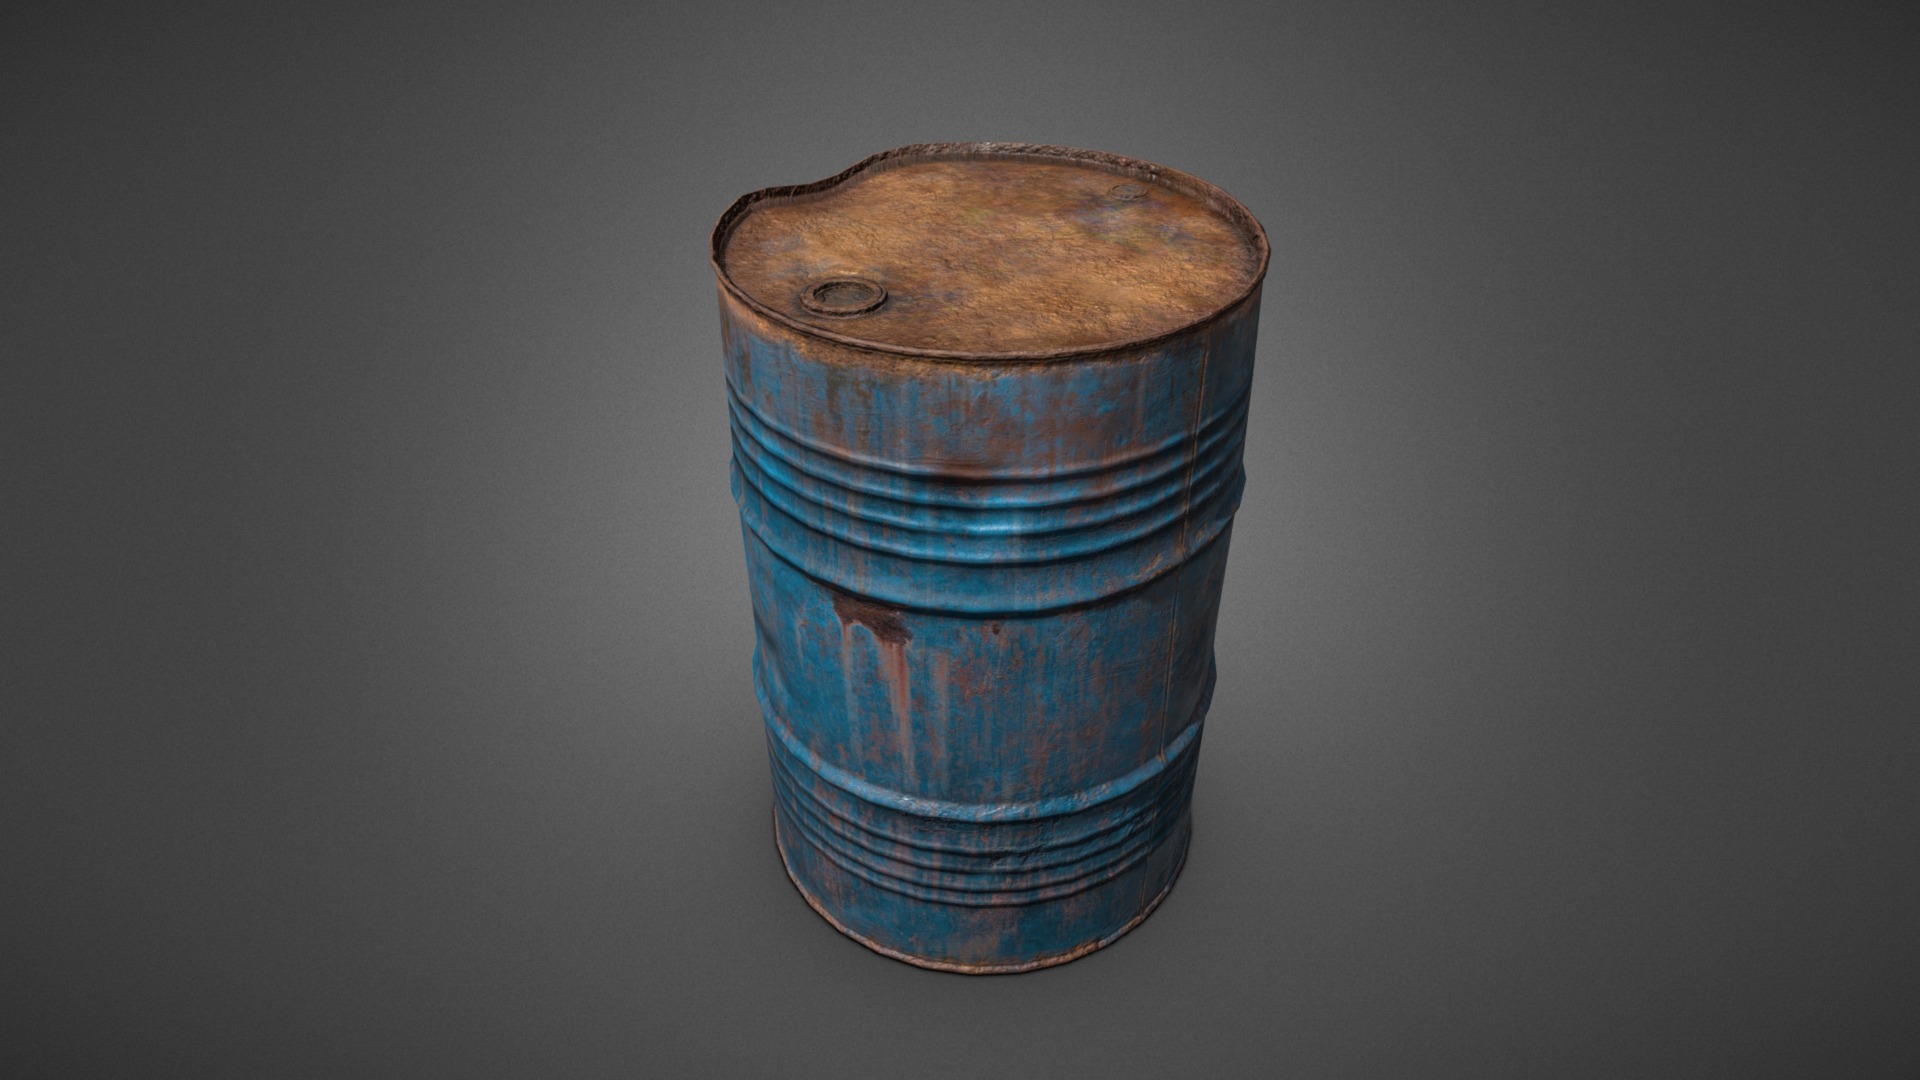 3D model Rusty Barrel Metal - This is a 3D model of the Rusty Barrel Metal. The 3D model is about a blue and white cylindrical object.